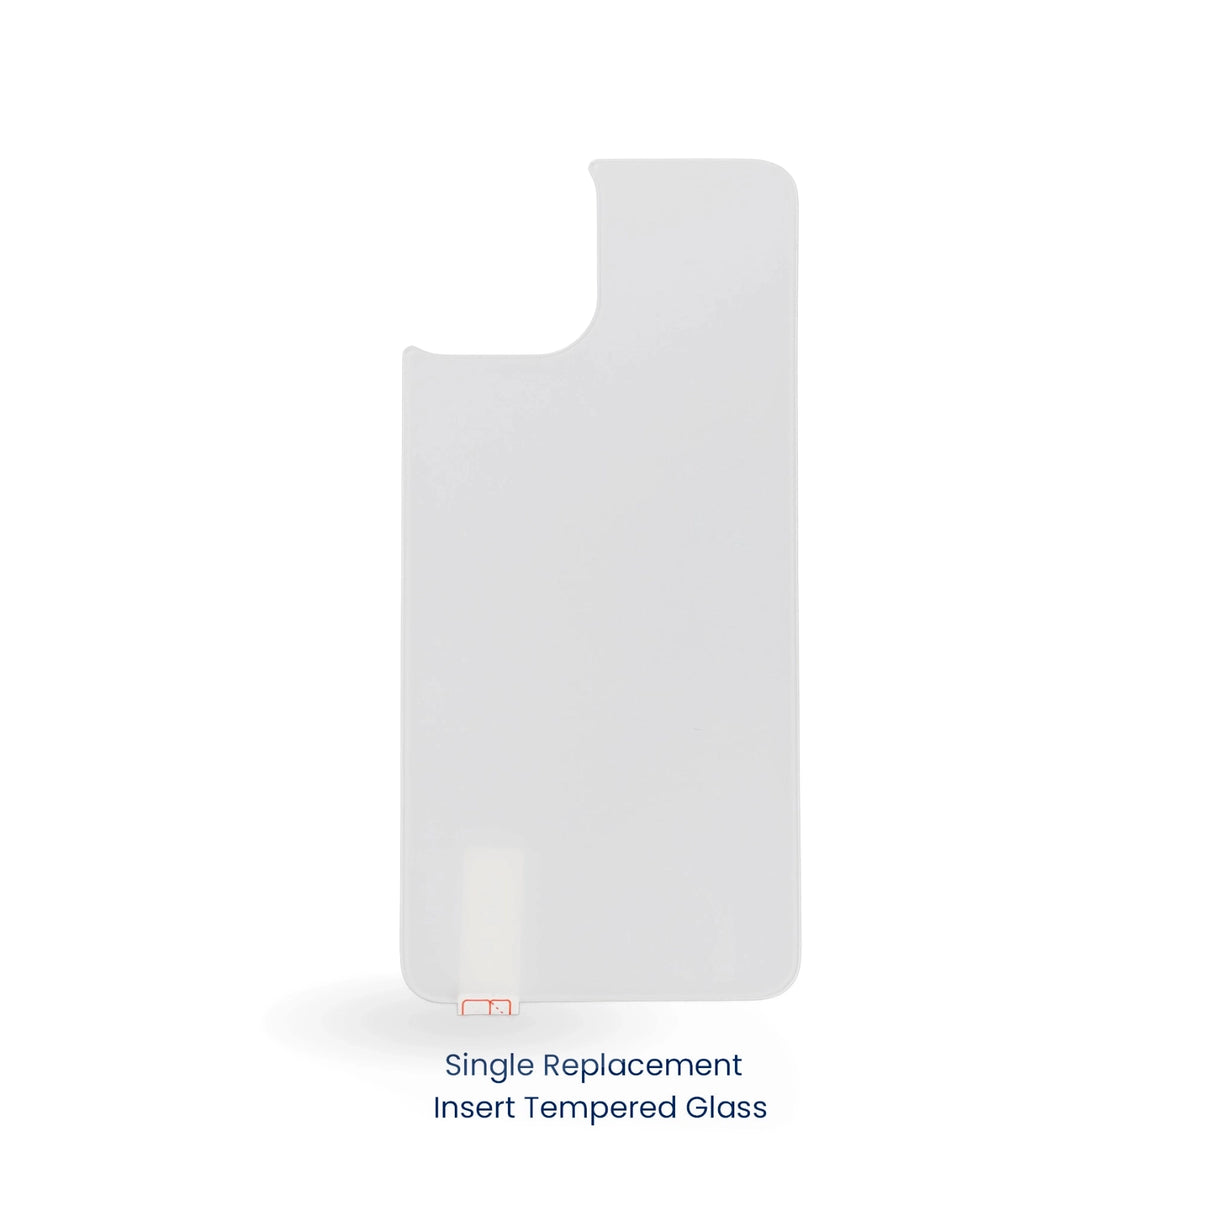 Phone Insert Tempered Glass Sublimation Blank